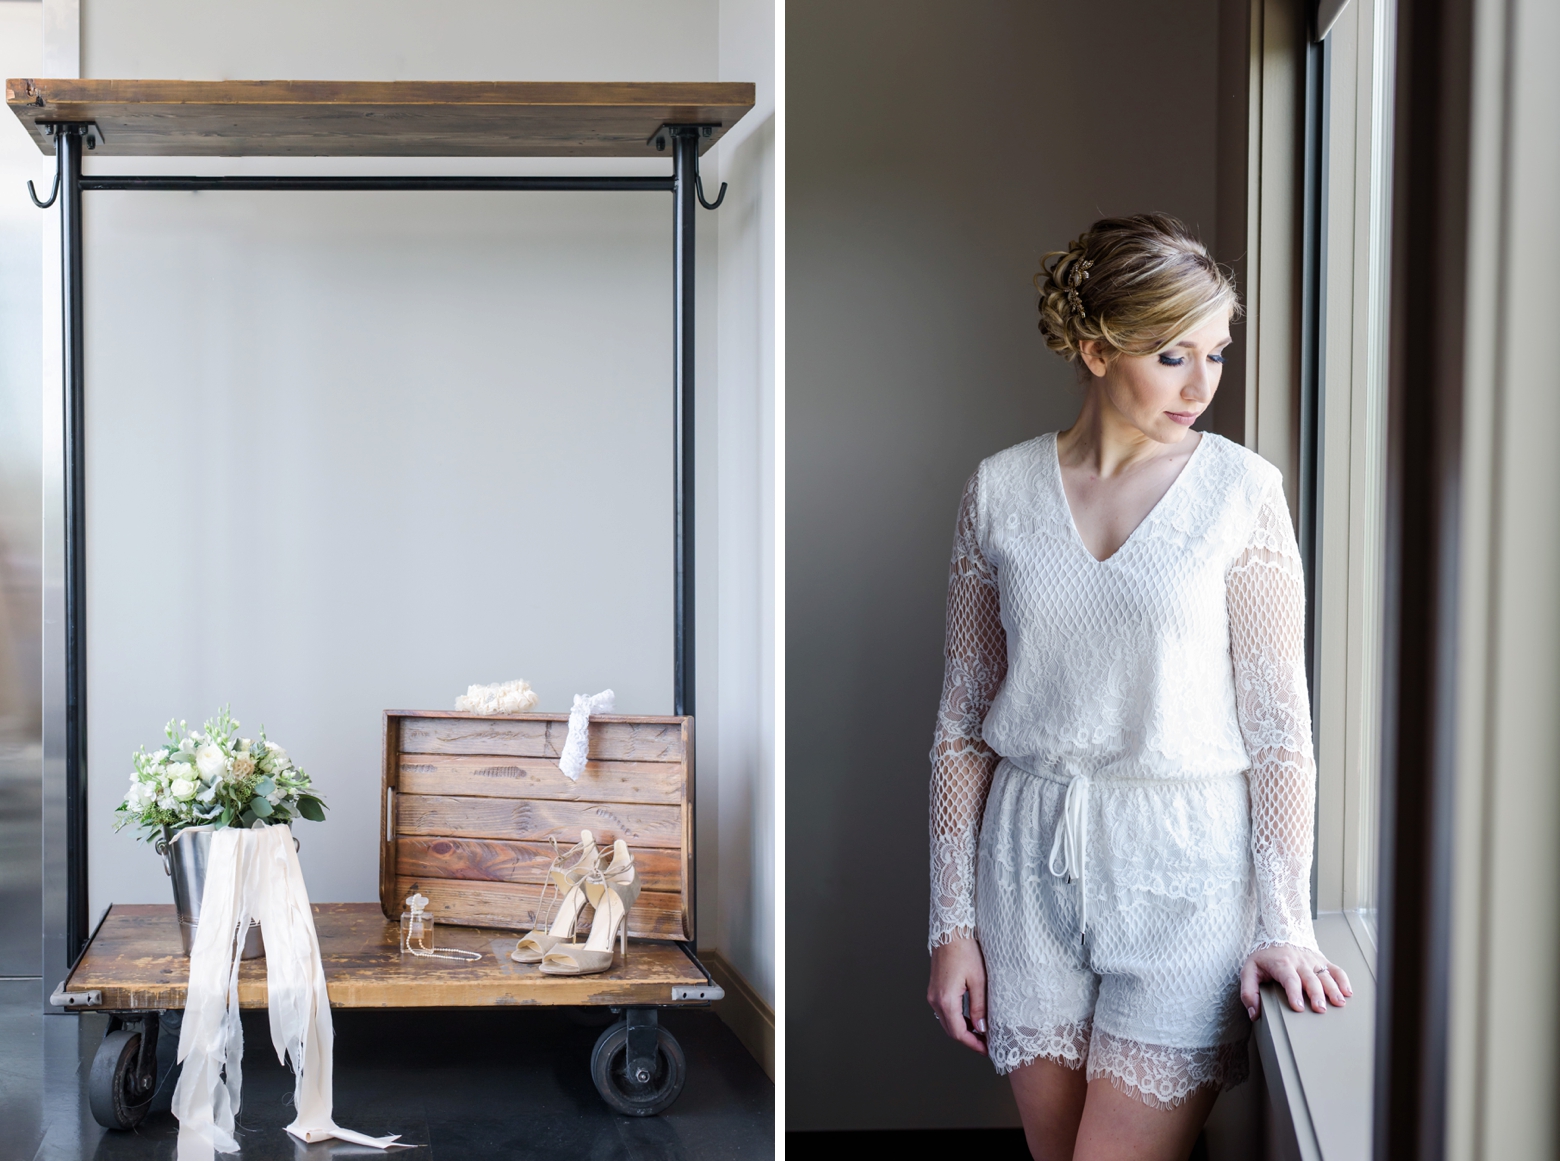 Bridal details on a hotel cart and the bride in her white romper before her wedding at oxford exchange